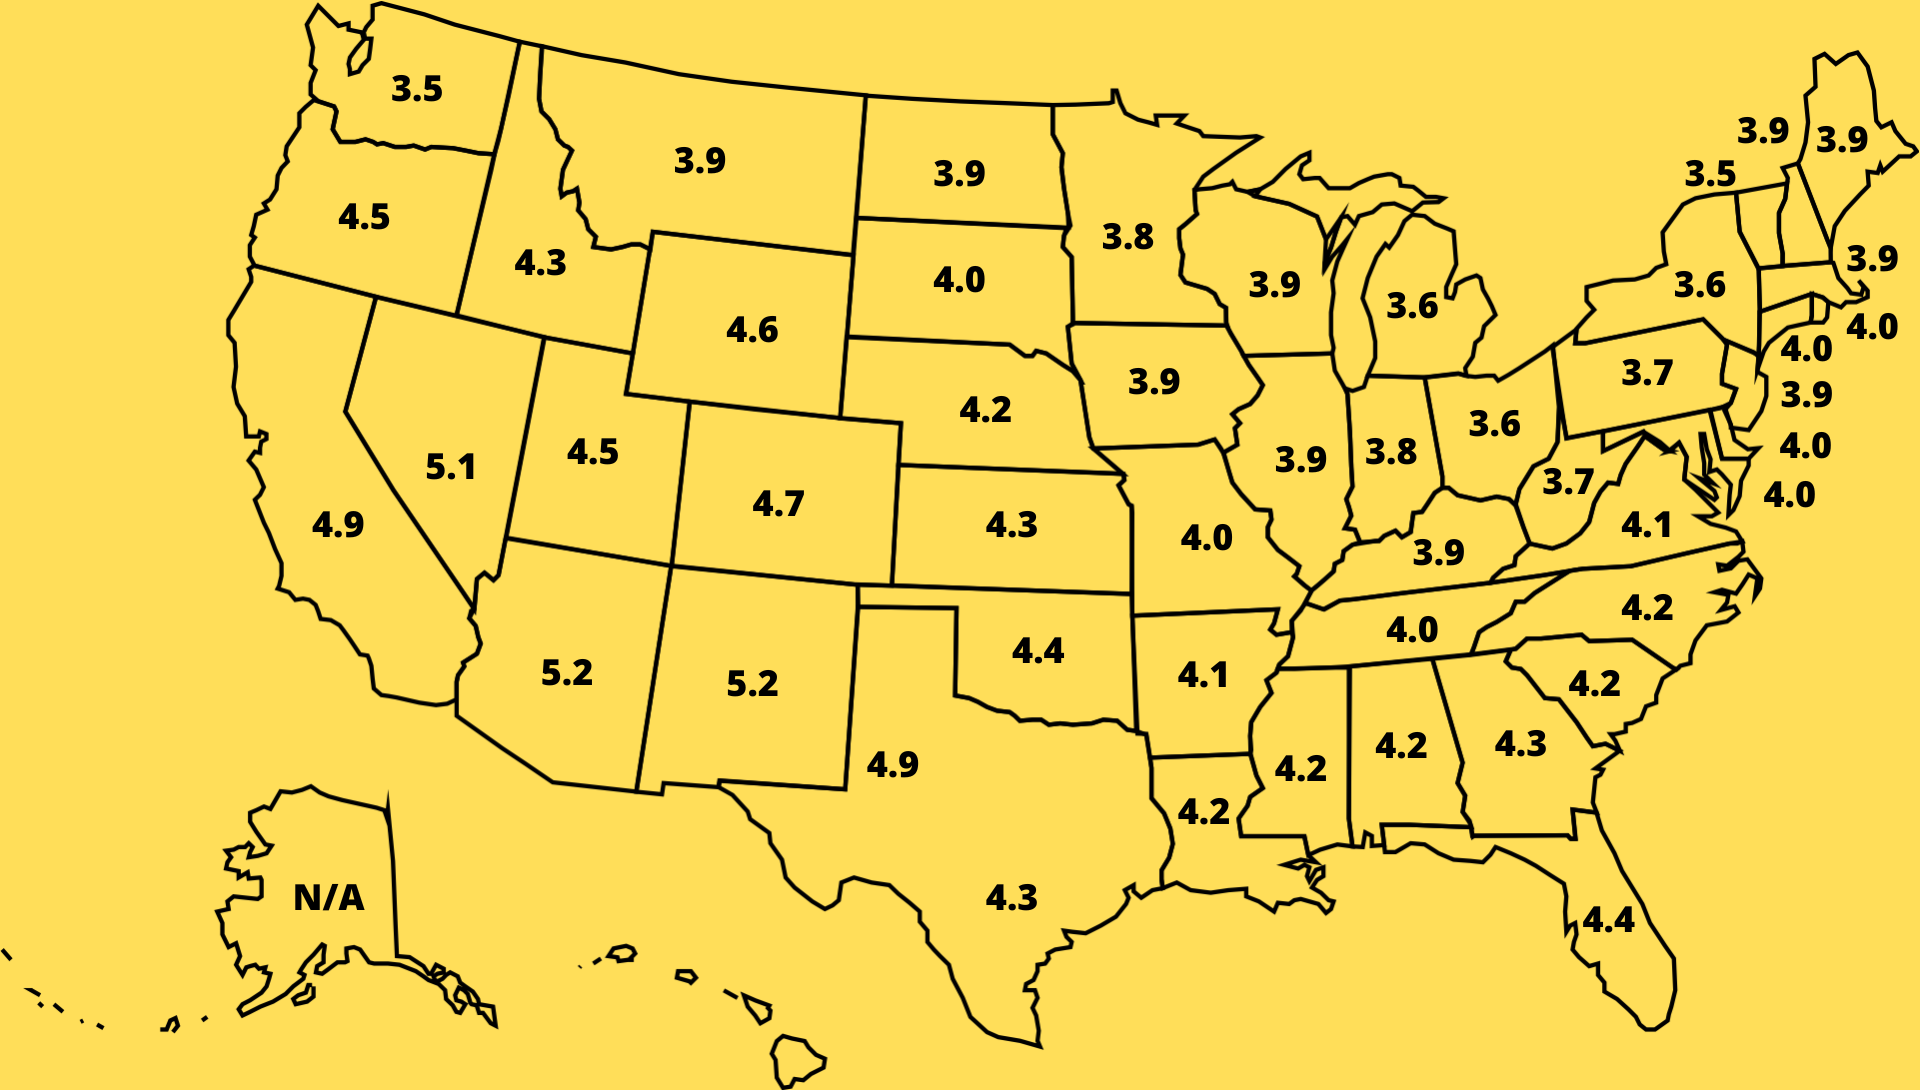 the average power generation per day by 1 kW of solar plant for different states of the US